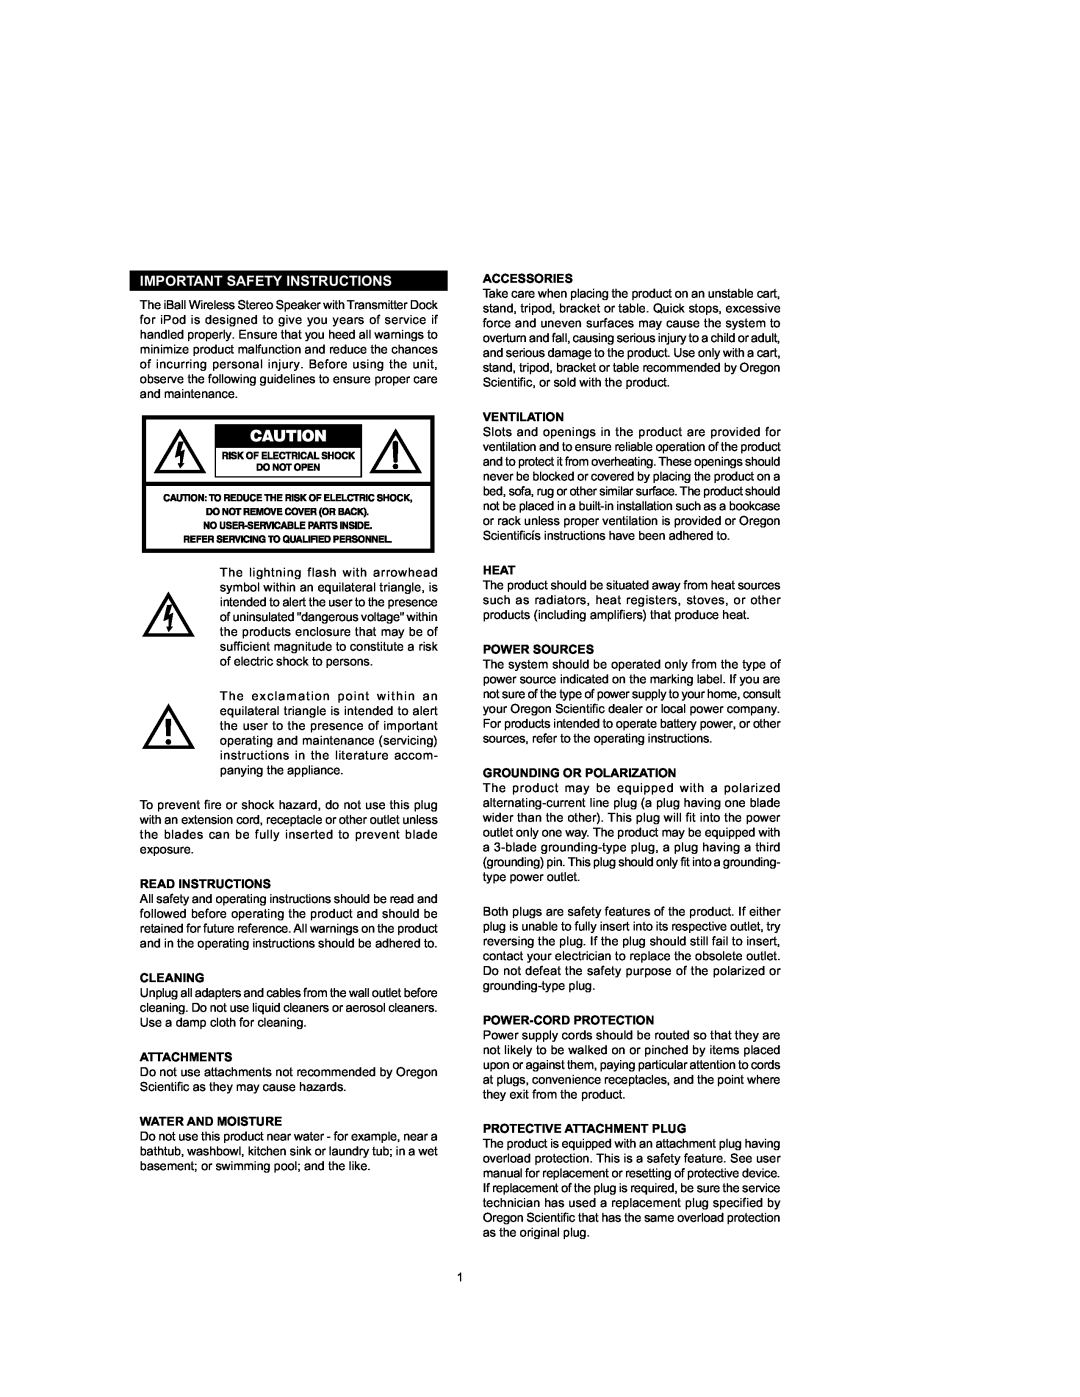 Oregon Scientific IB368 important safety instructions Important Safety Instructions, Read Instructions, Cleaning, Heat 